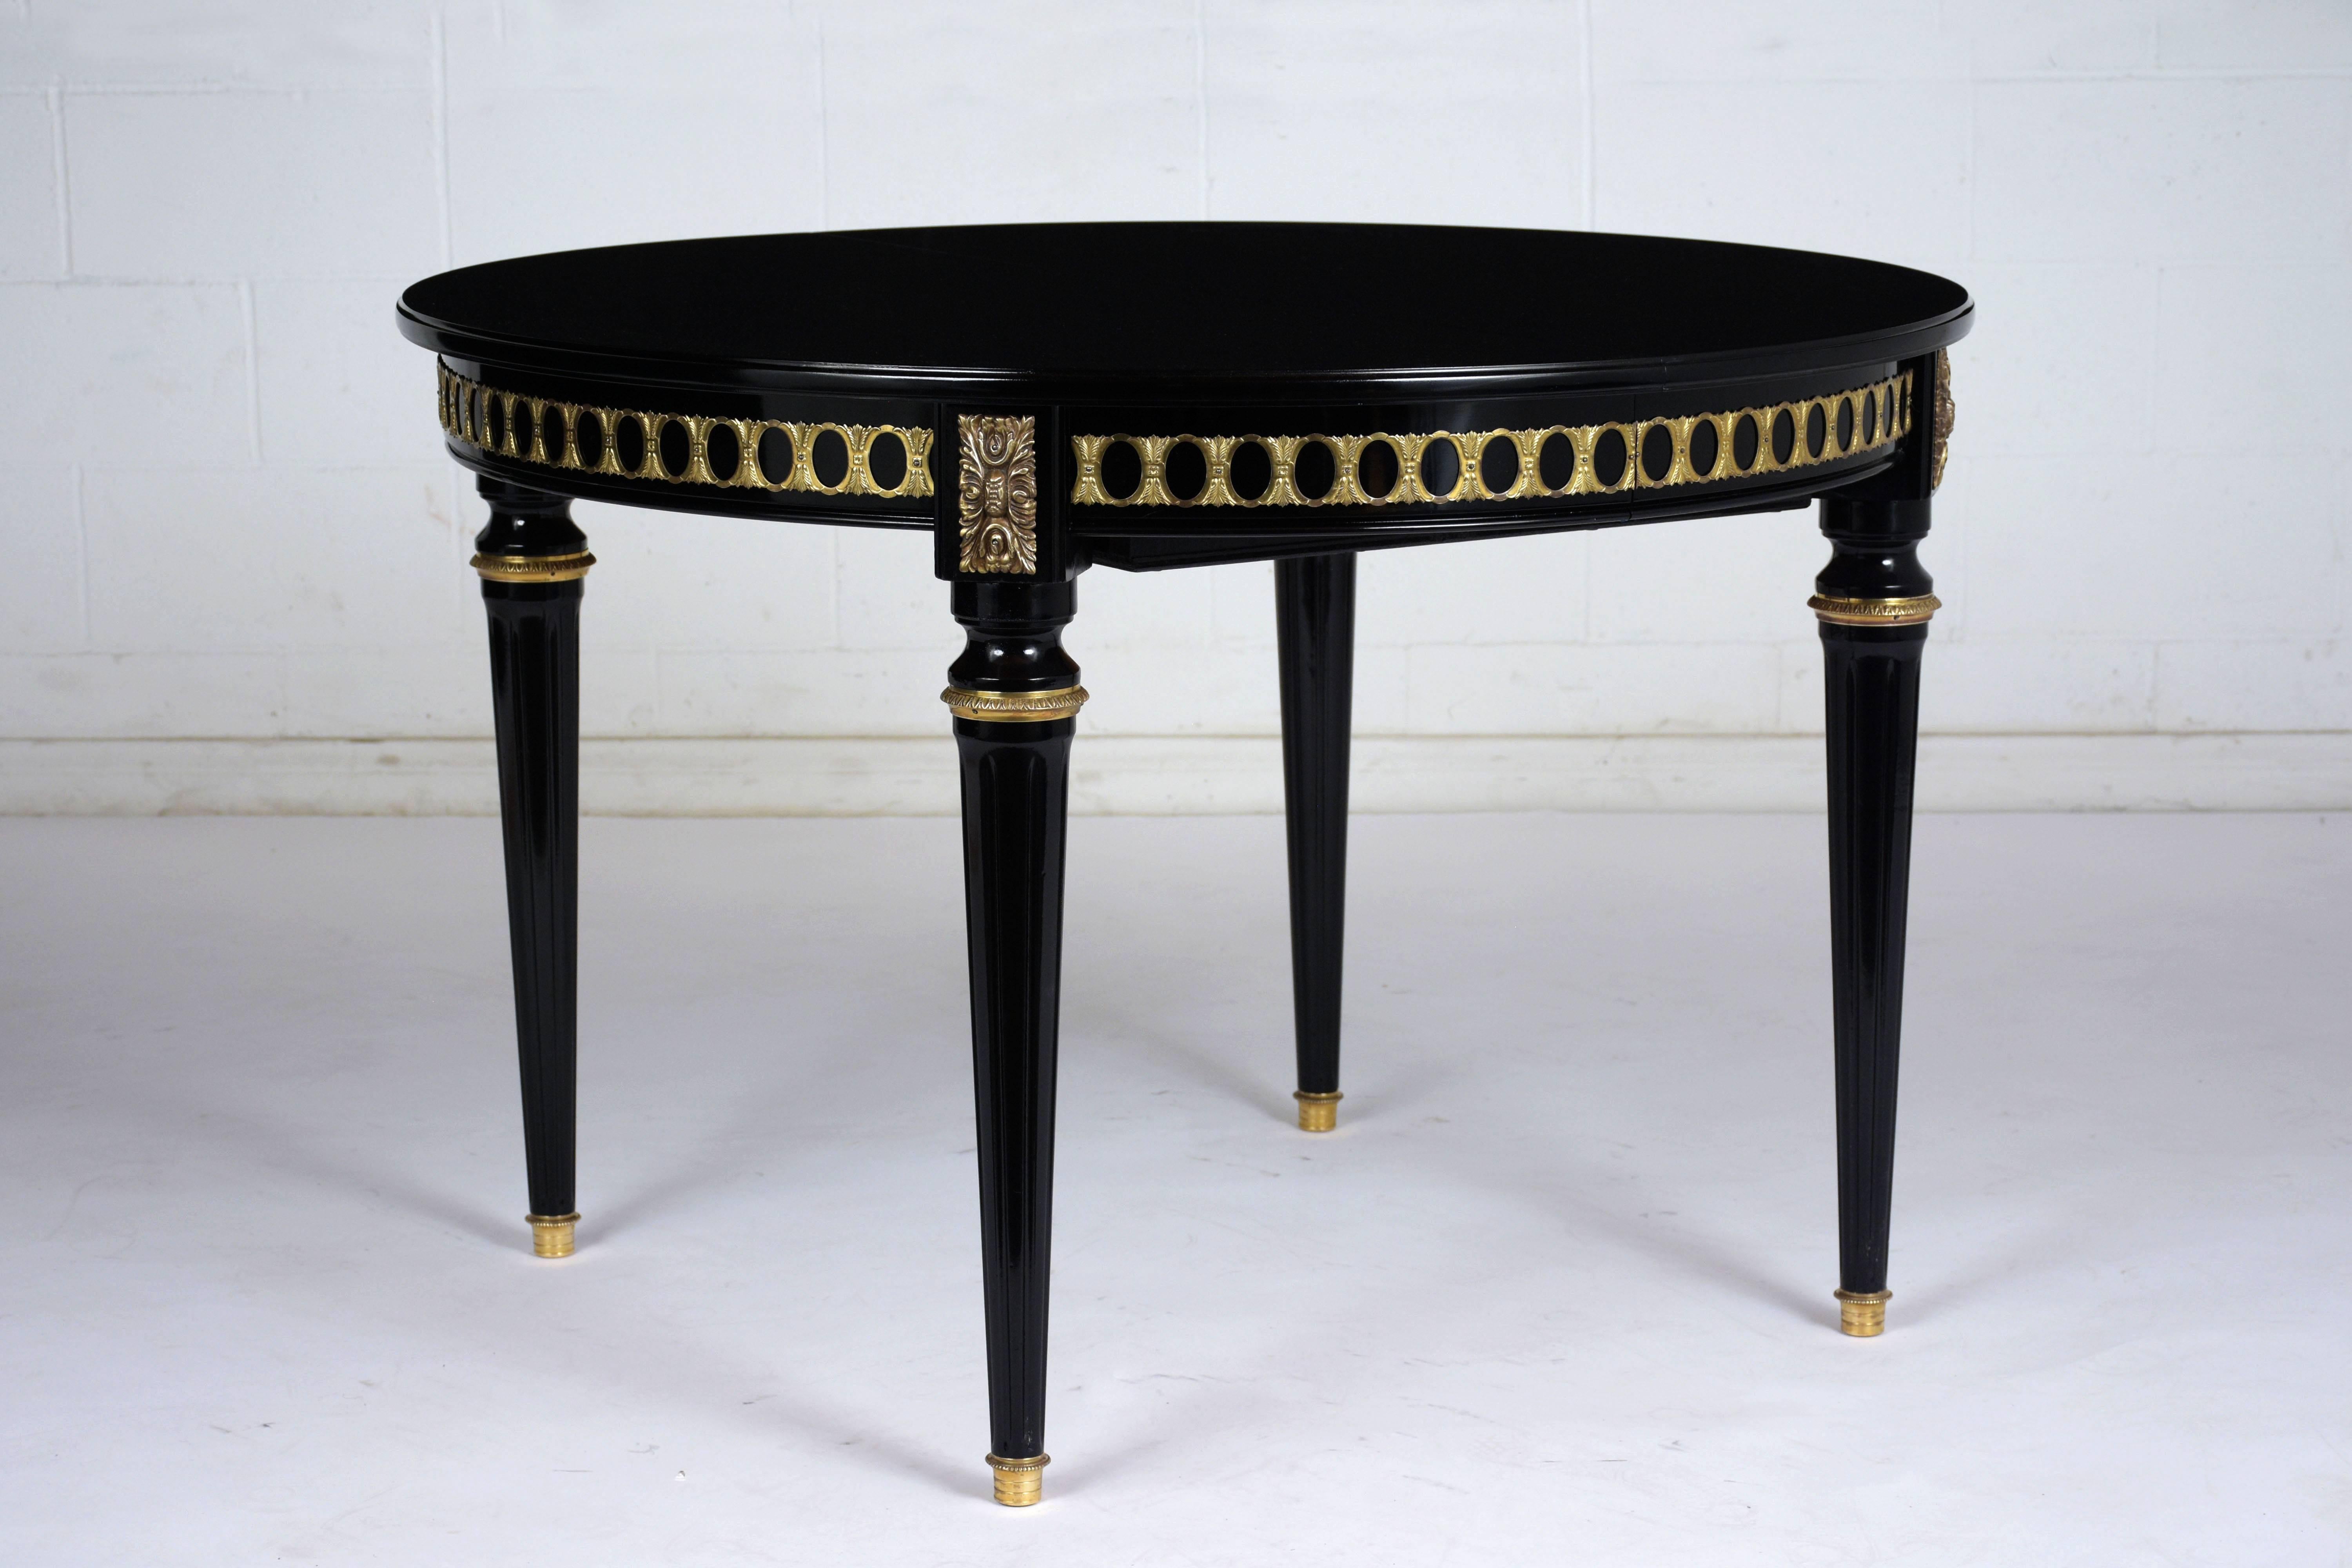 This 1920s French Louis XVI-style dining table extends to double its length with two butterfly leaves hidden within the table with a sound and practical mechanism. The mahogany table is very elegant with an ebonized and lacquered finish. The skirt